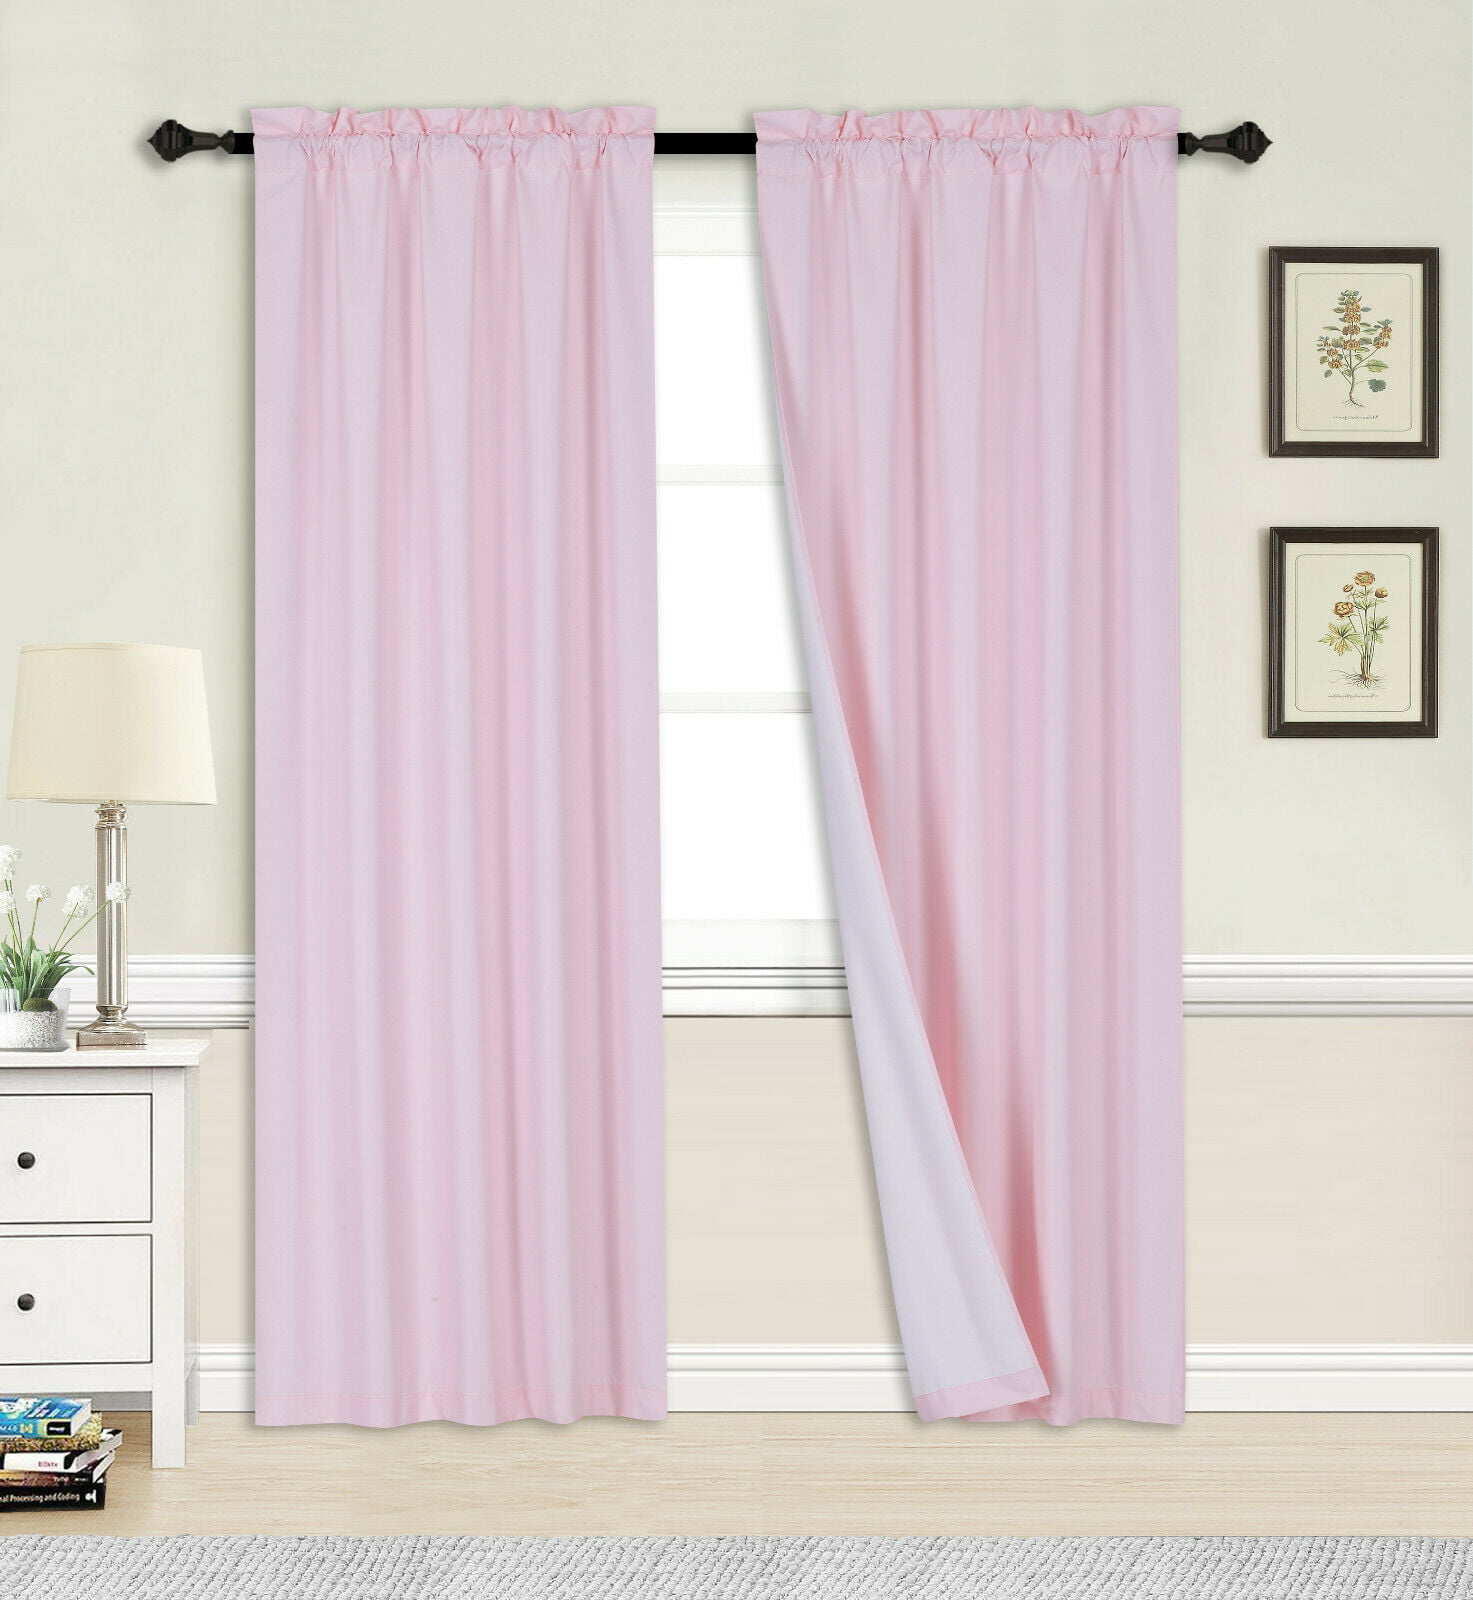 1 Set Rod Pocket Insulated Thermal Lined Blackout Window Curtain R64 Silver 